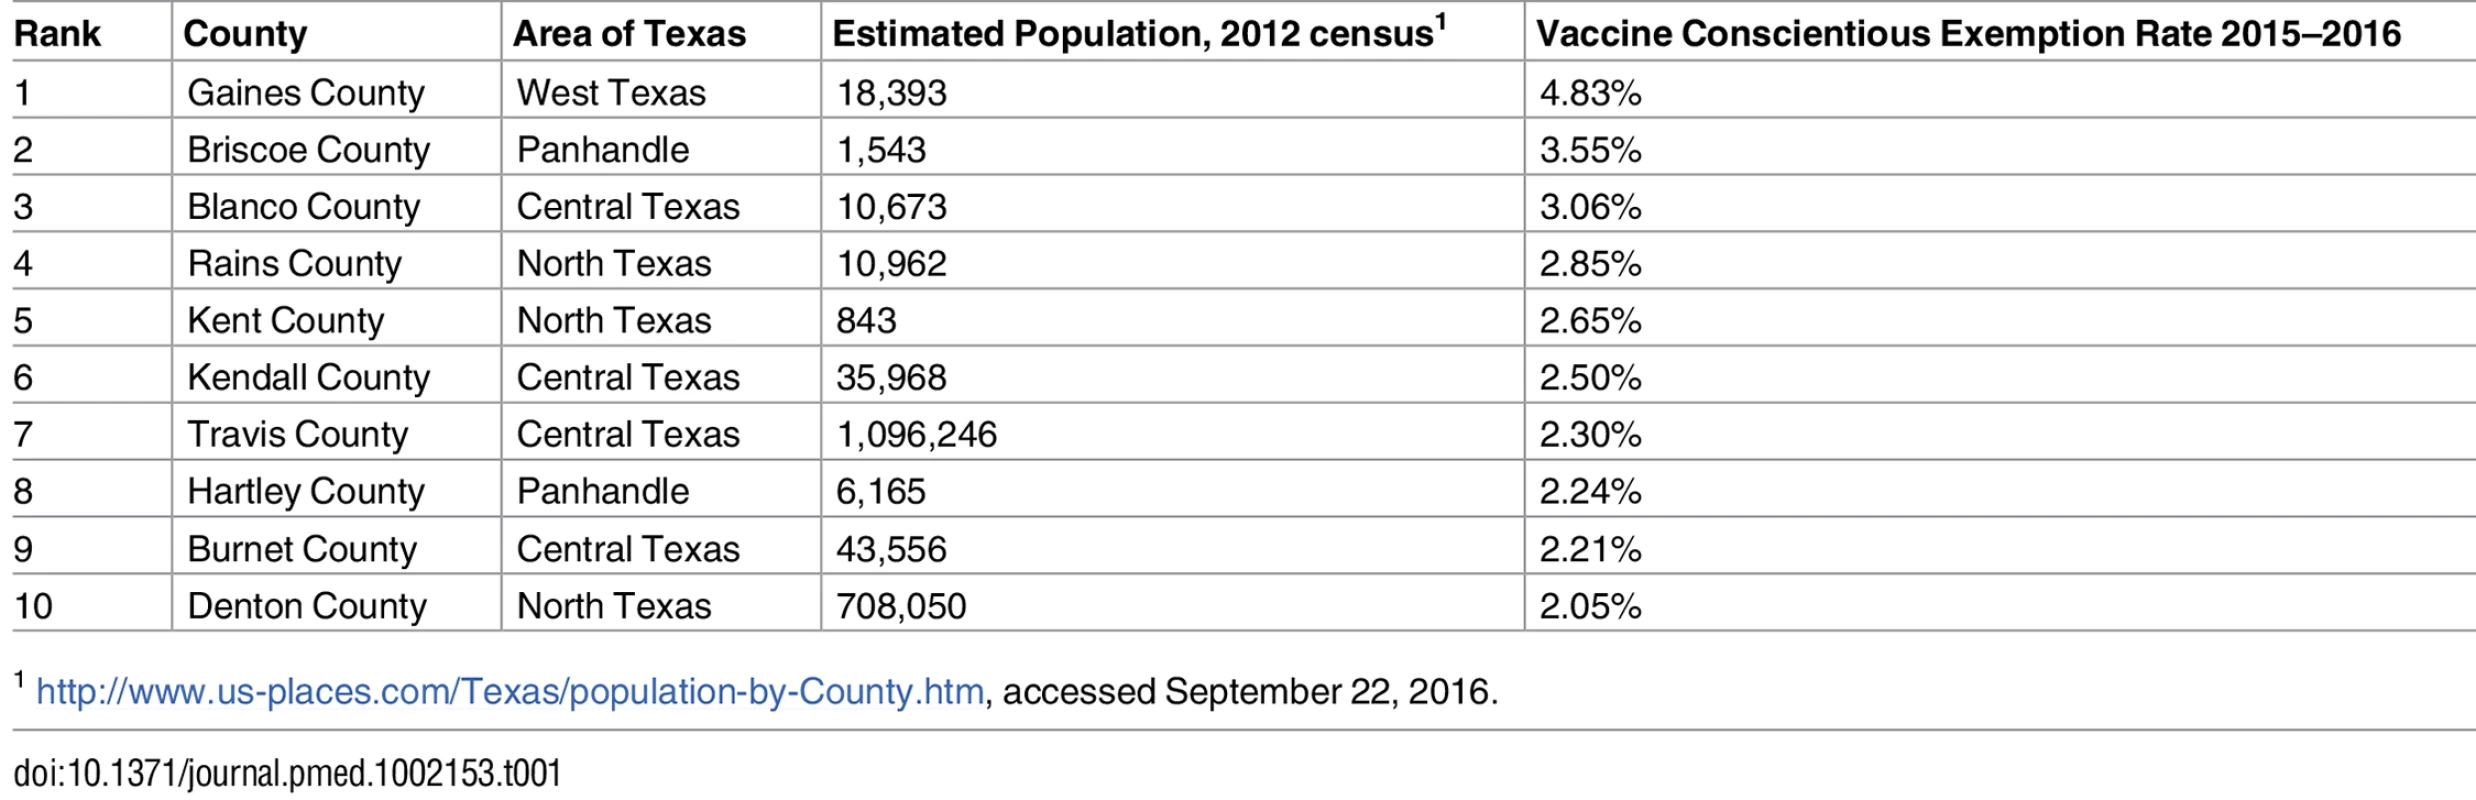 Rank of leading Texas county vaccine “conscientious exemption” rates (based on information from the Texas Department of State Health Services <a href=&quot;https://www.dshs.texas.gov/immunize/coverage/Conscientious-Exemptions-Data.shtm&quot;>https://www.dshs.texas.gov/immunize/coverage/Conscientious-Exemptions-Data.shtm</a>).